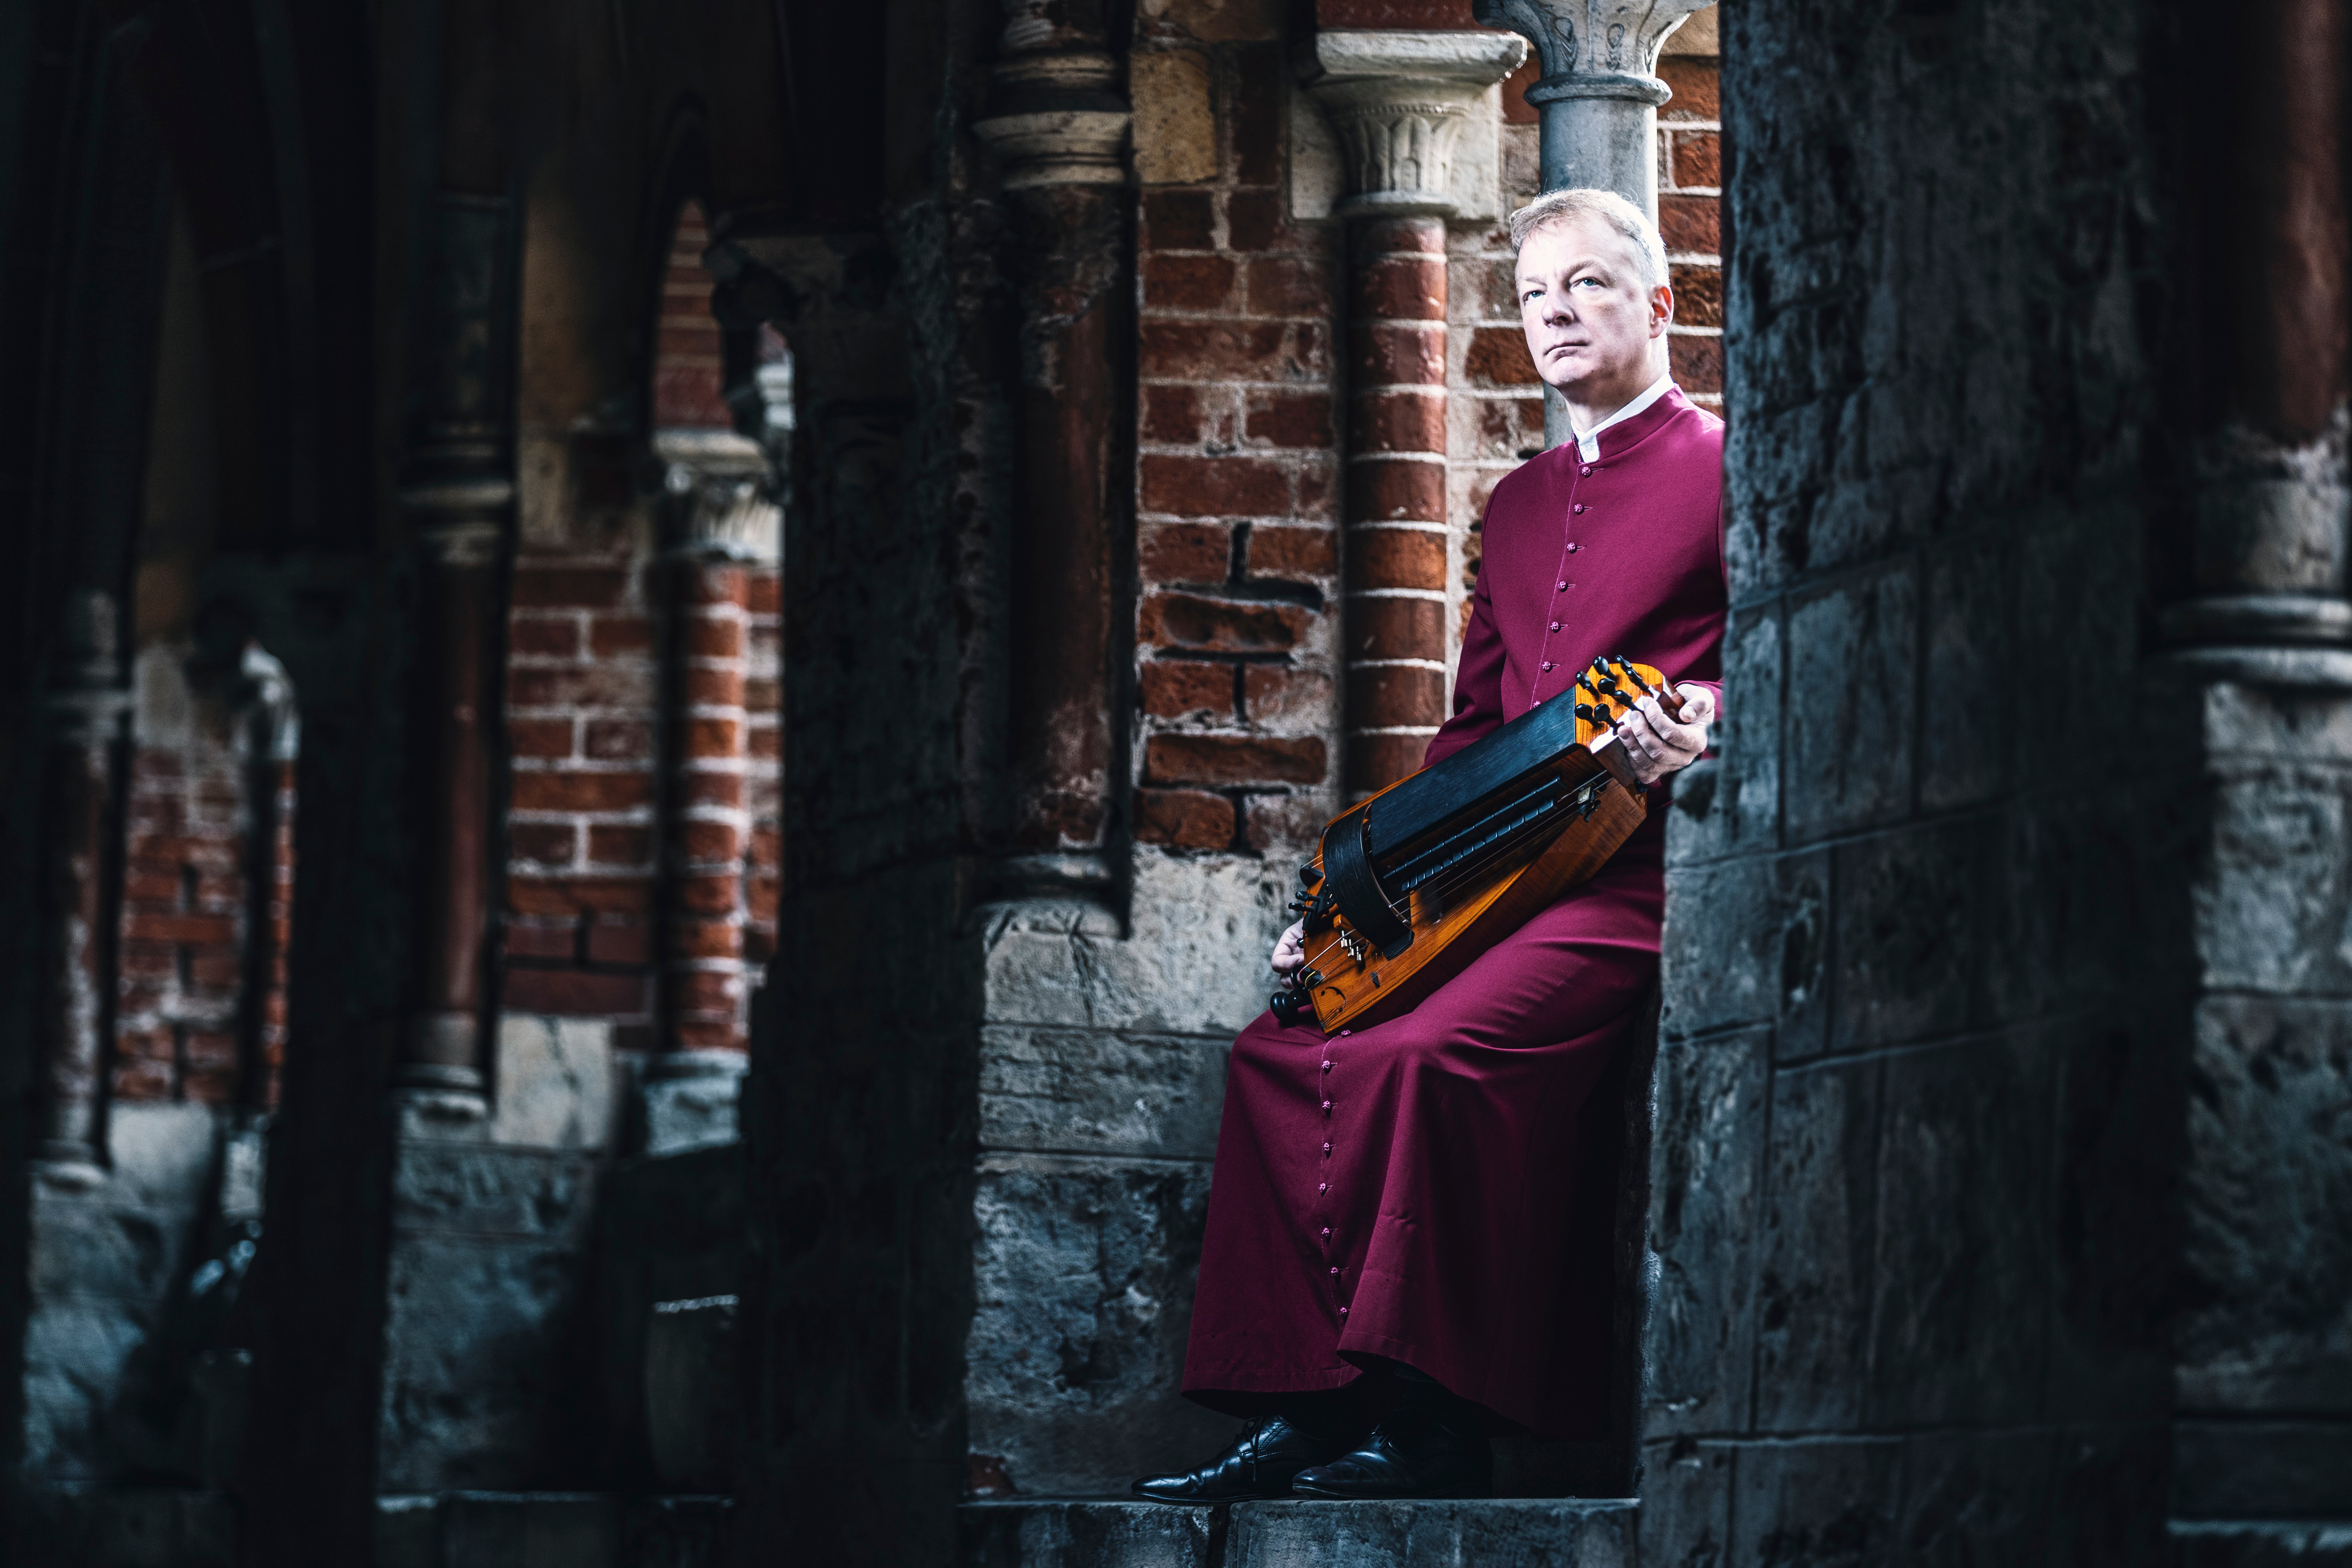 Guntars Prānis, the director of Schola Cantorum Riga, says that improvisation was central to the art of singing in medieval times